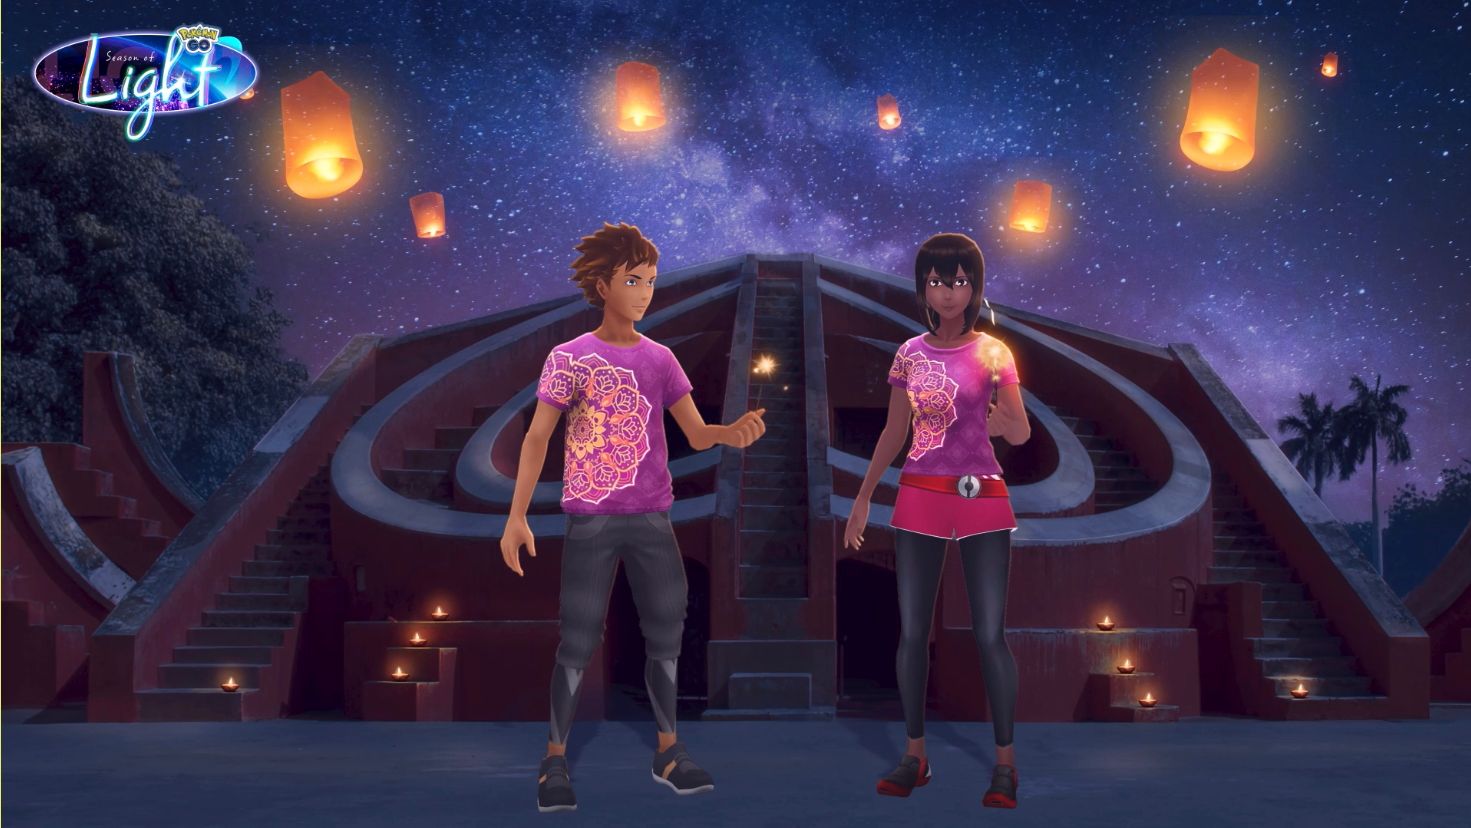 Two Pokemon Go Trainers using the Sparkler Pose cosmetic item